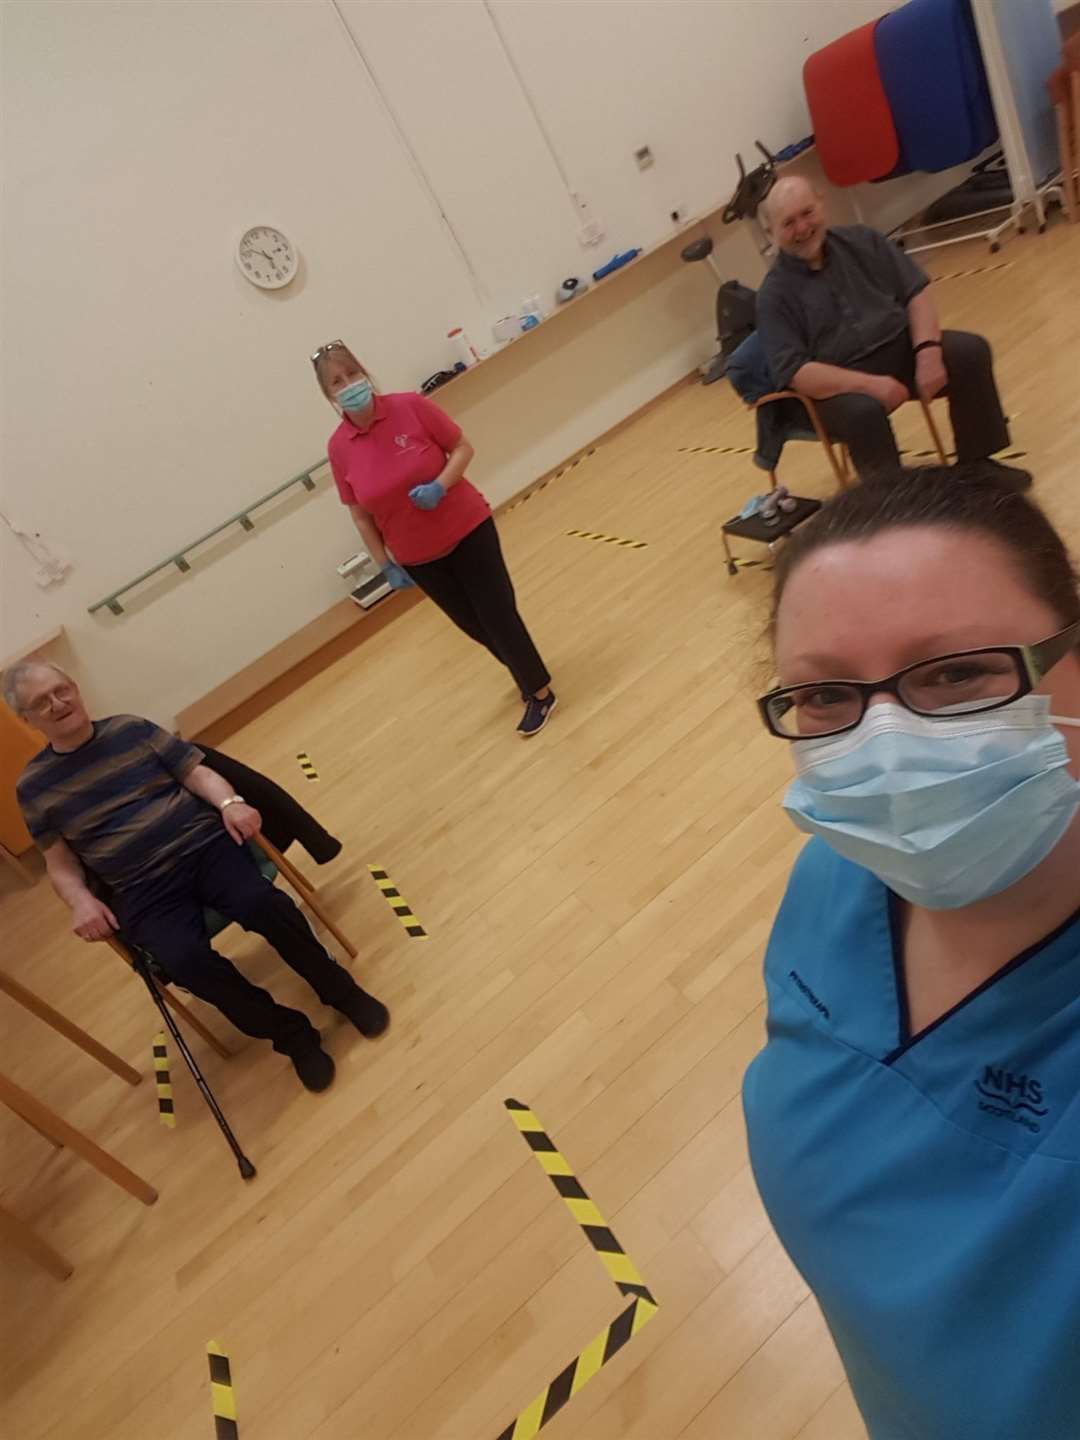 Lesley-Anne (front) and her colleague Nicola Munro, rehab assistant, along with two of our patients Mike Campbell and Ian Fraser